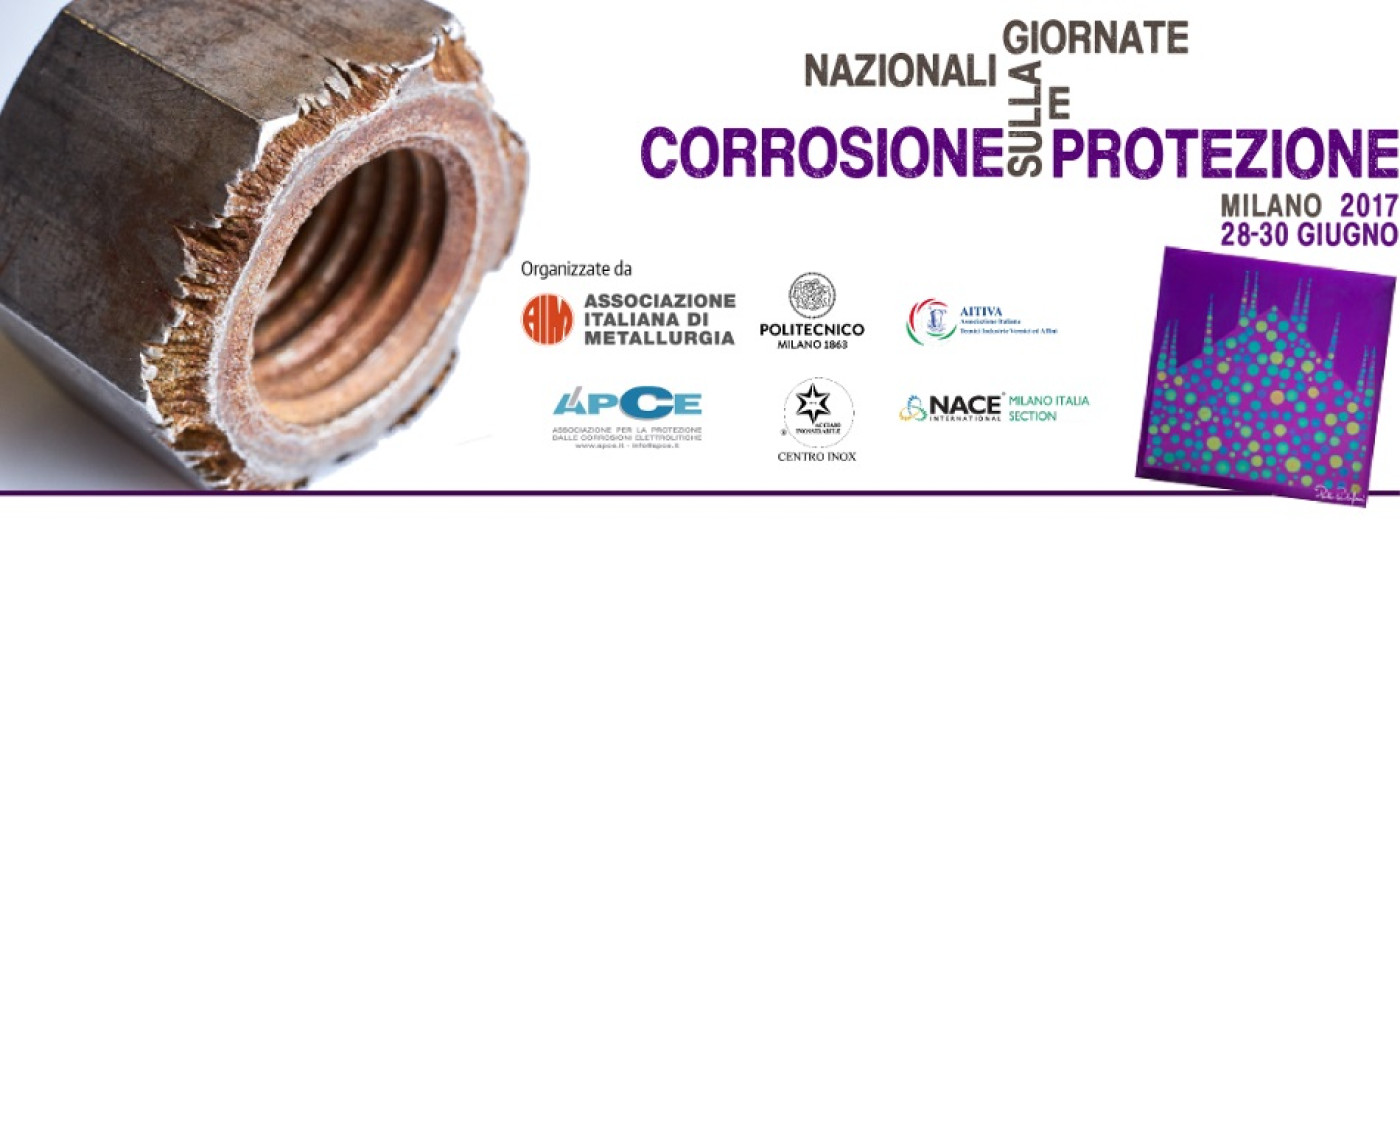 National Days on Corrosion and Protection